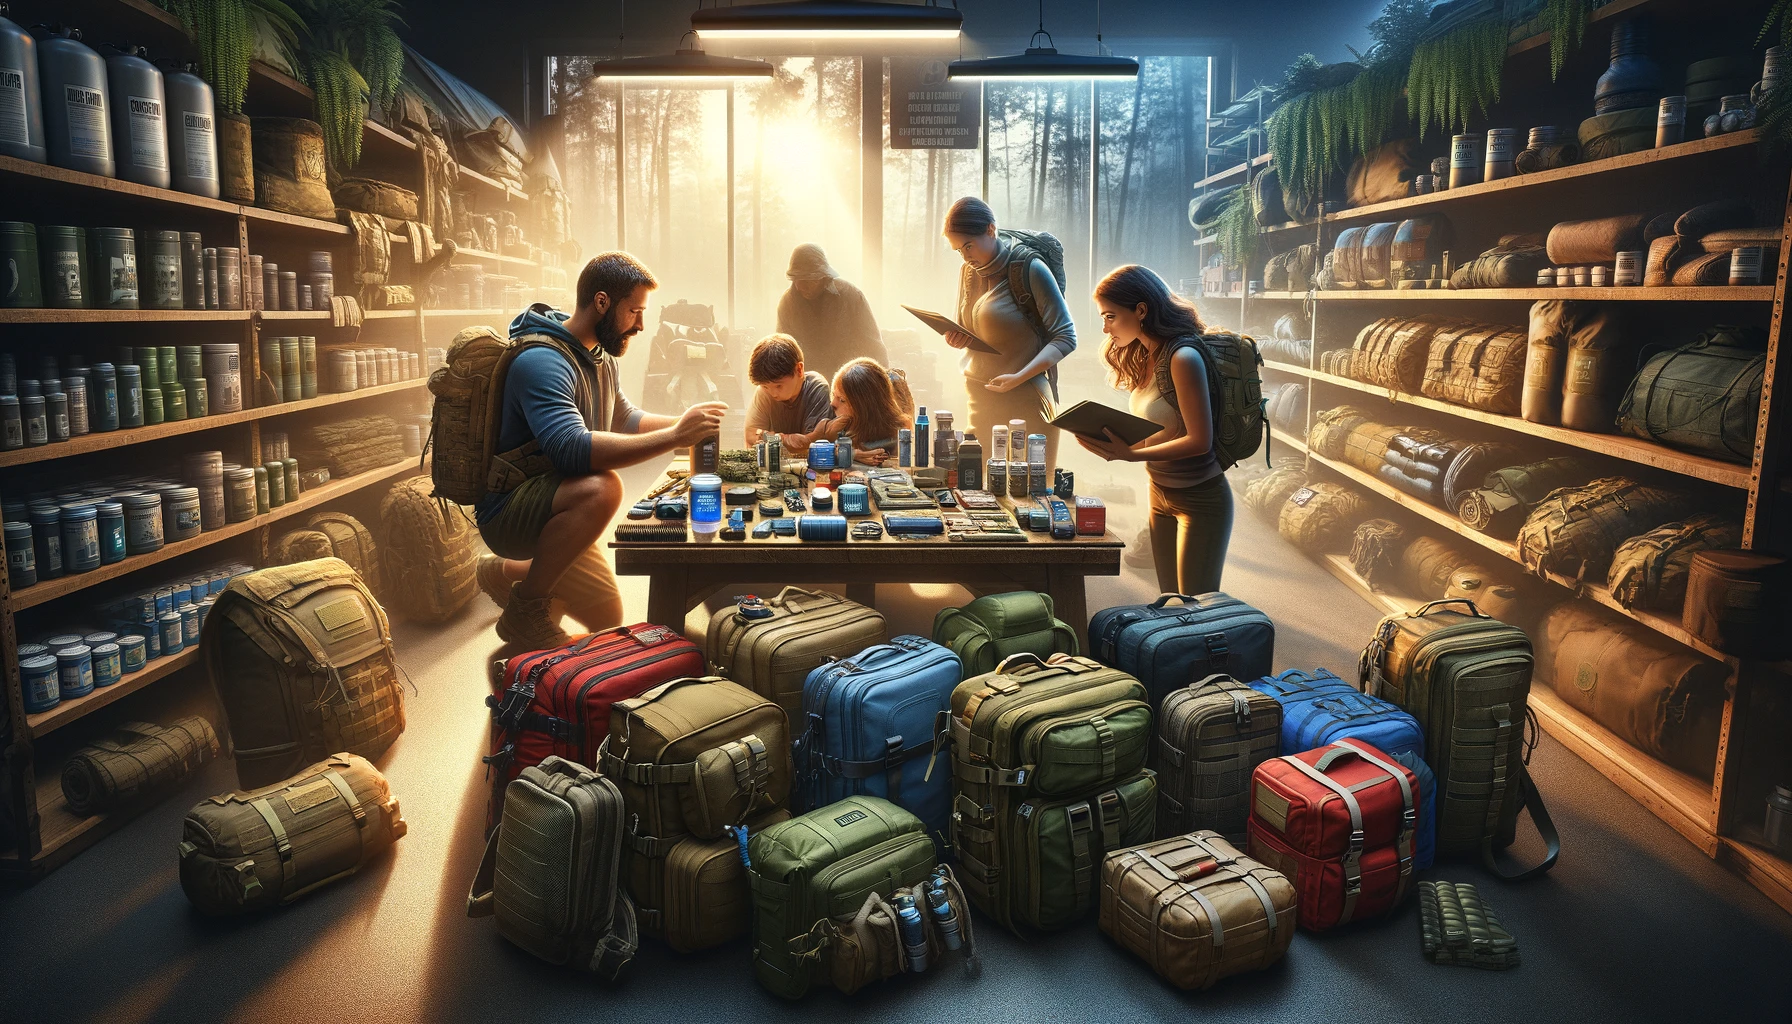 A family consults with a store employee while examining various bug out bags filled with essential survival items in an outdoor equipment store, highlighting the importance of tailored preparedness